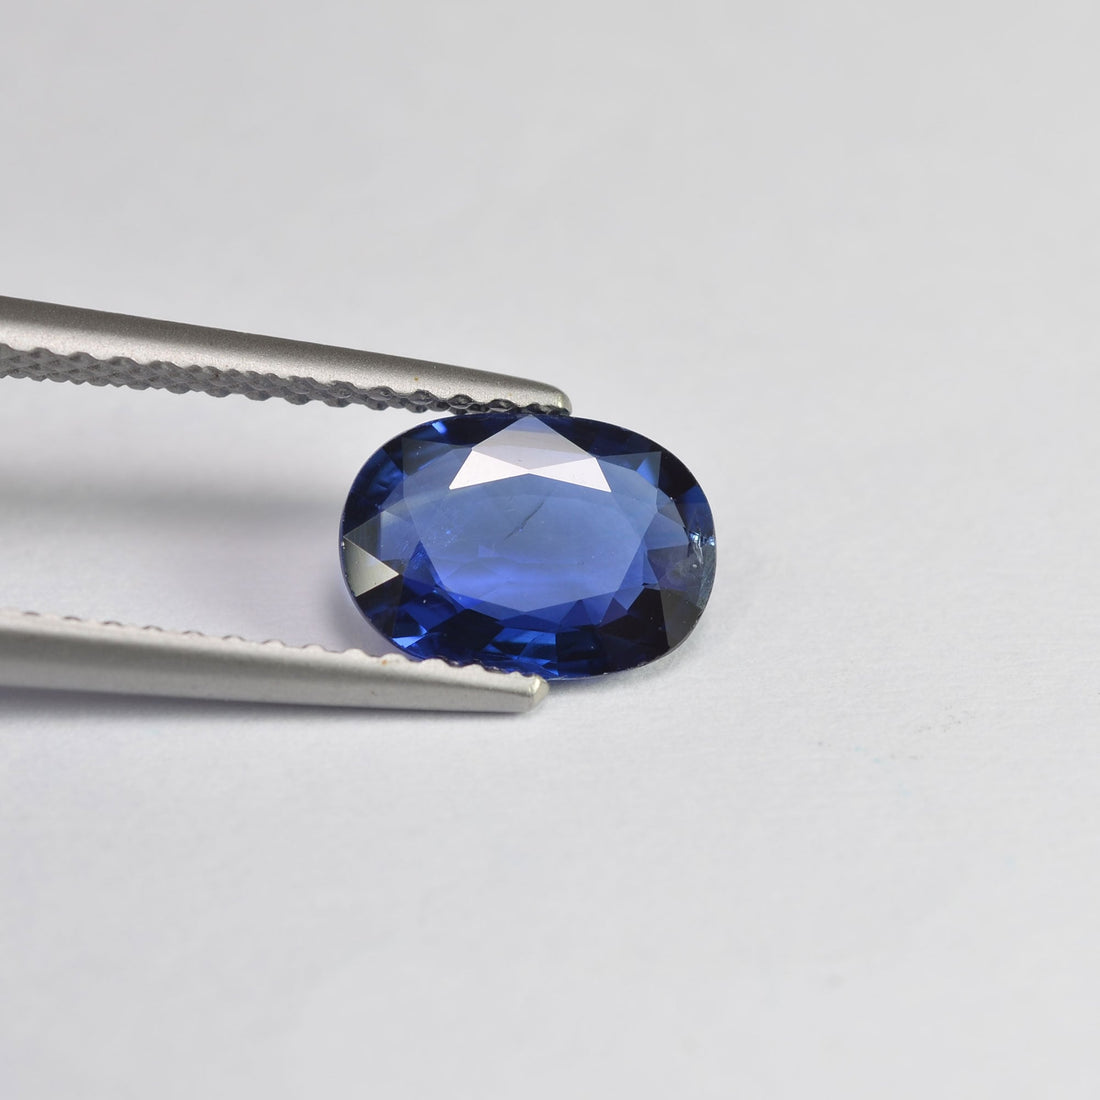 1.14 cts Natural Blue Sapphire Loose Gemstone Oval Cut Certified